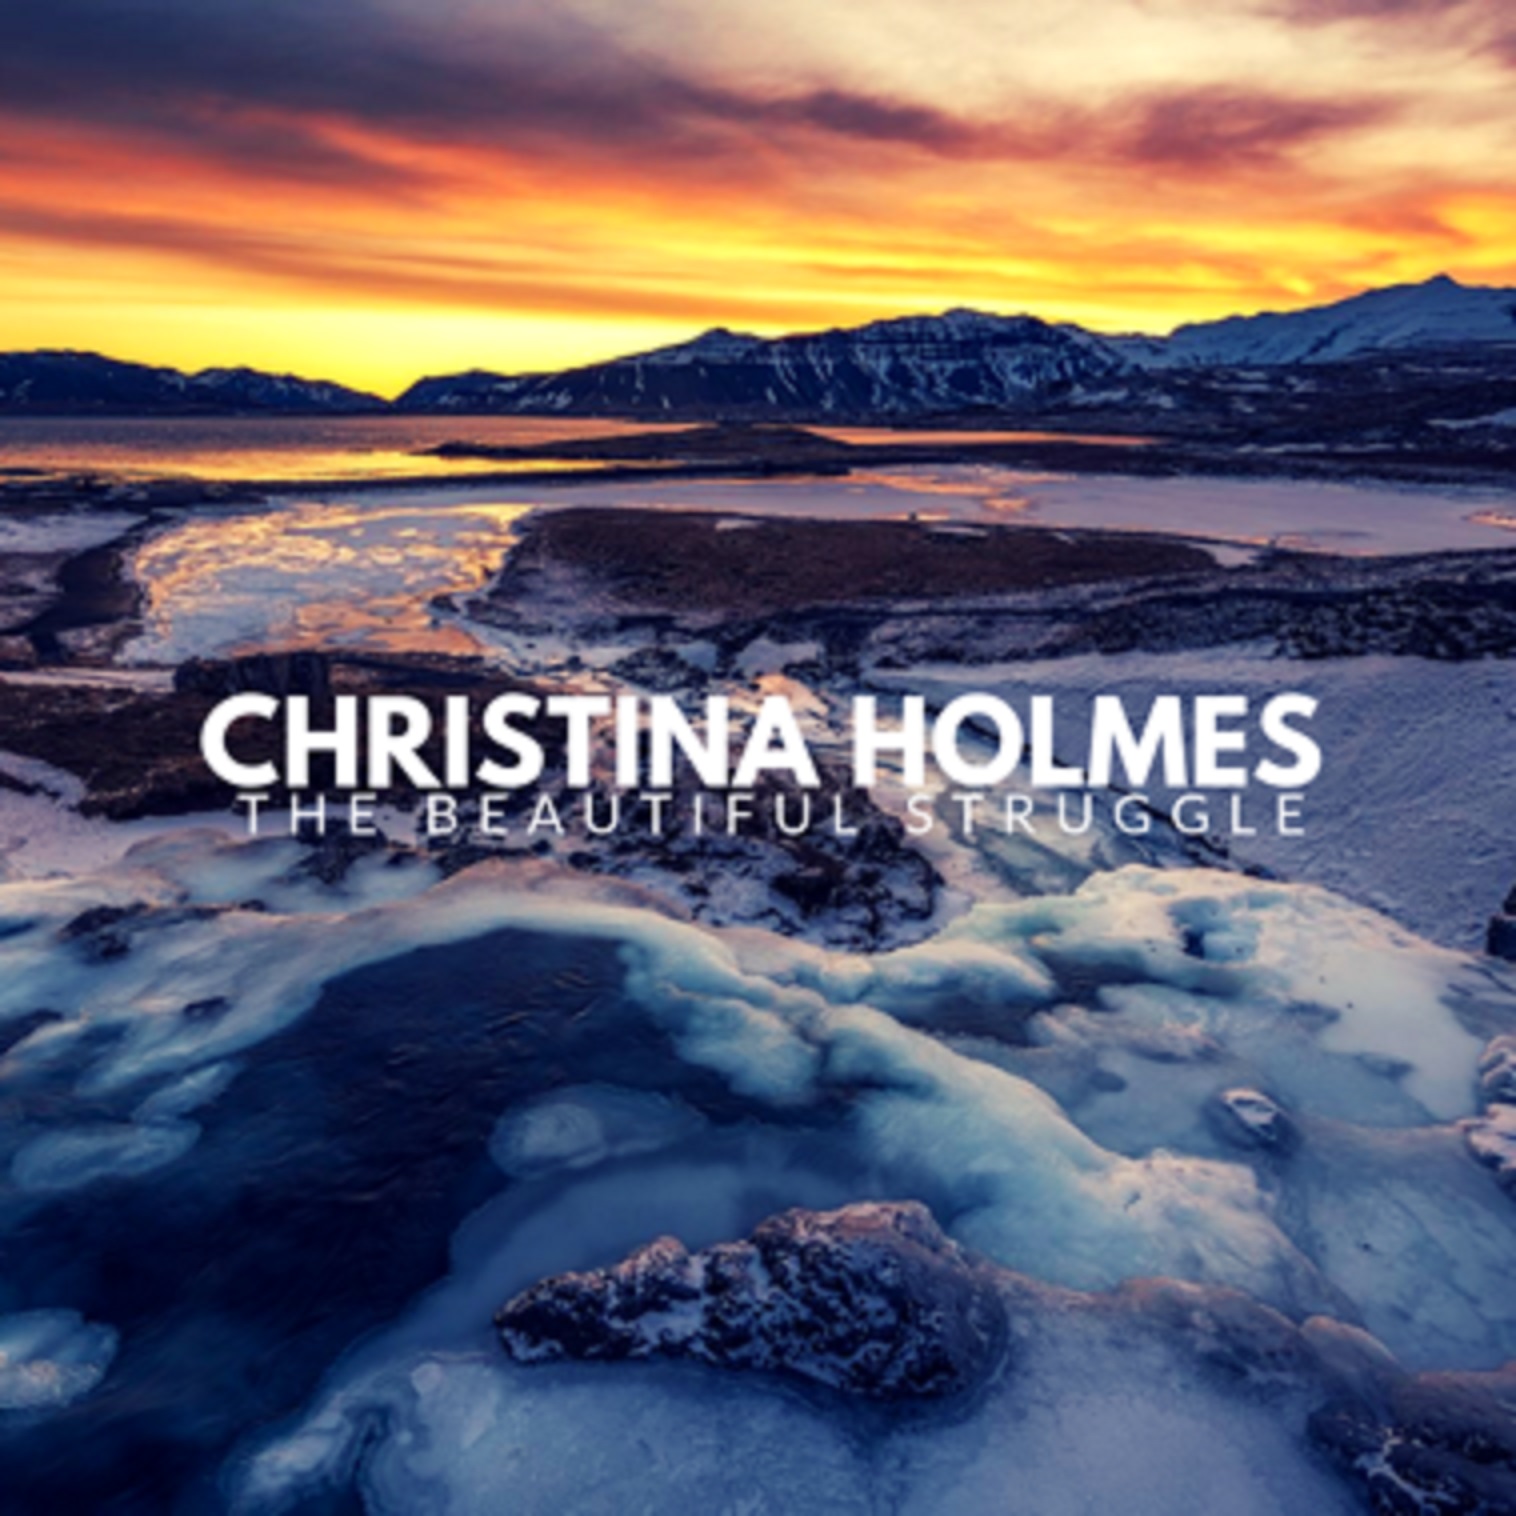 CHRISTINA HOLMES TO RELEASE THE BEAUTIFUL STRUGGLE MAY 31ST